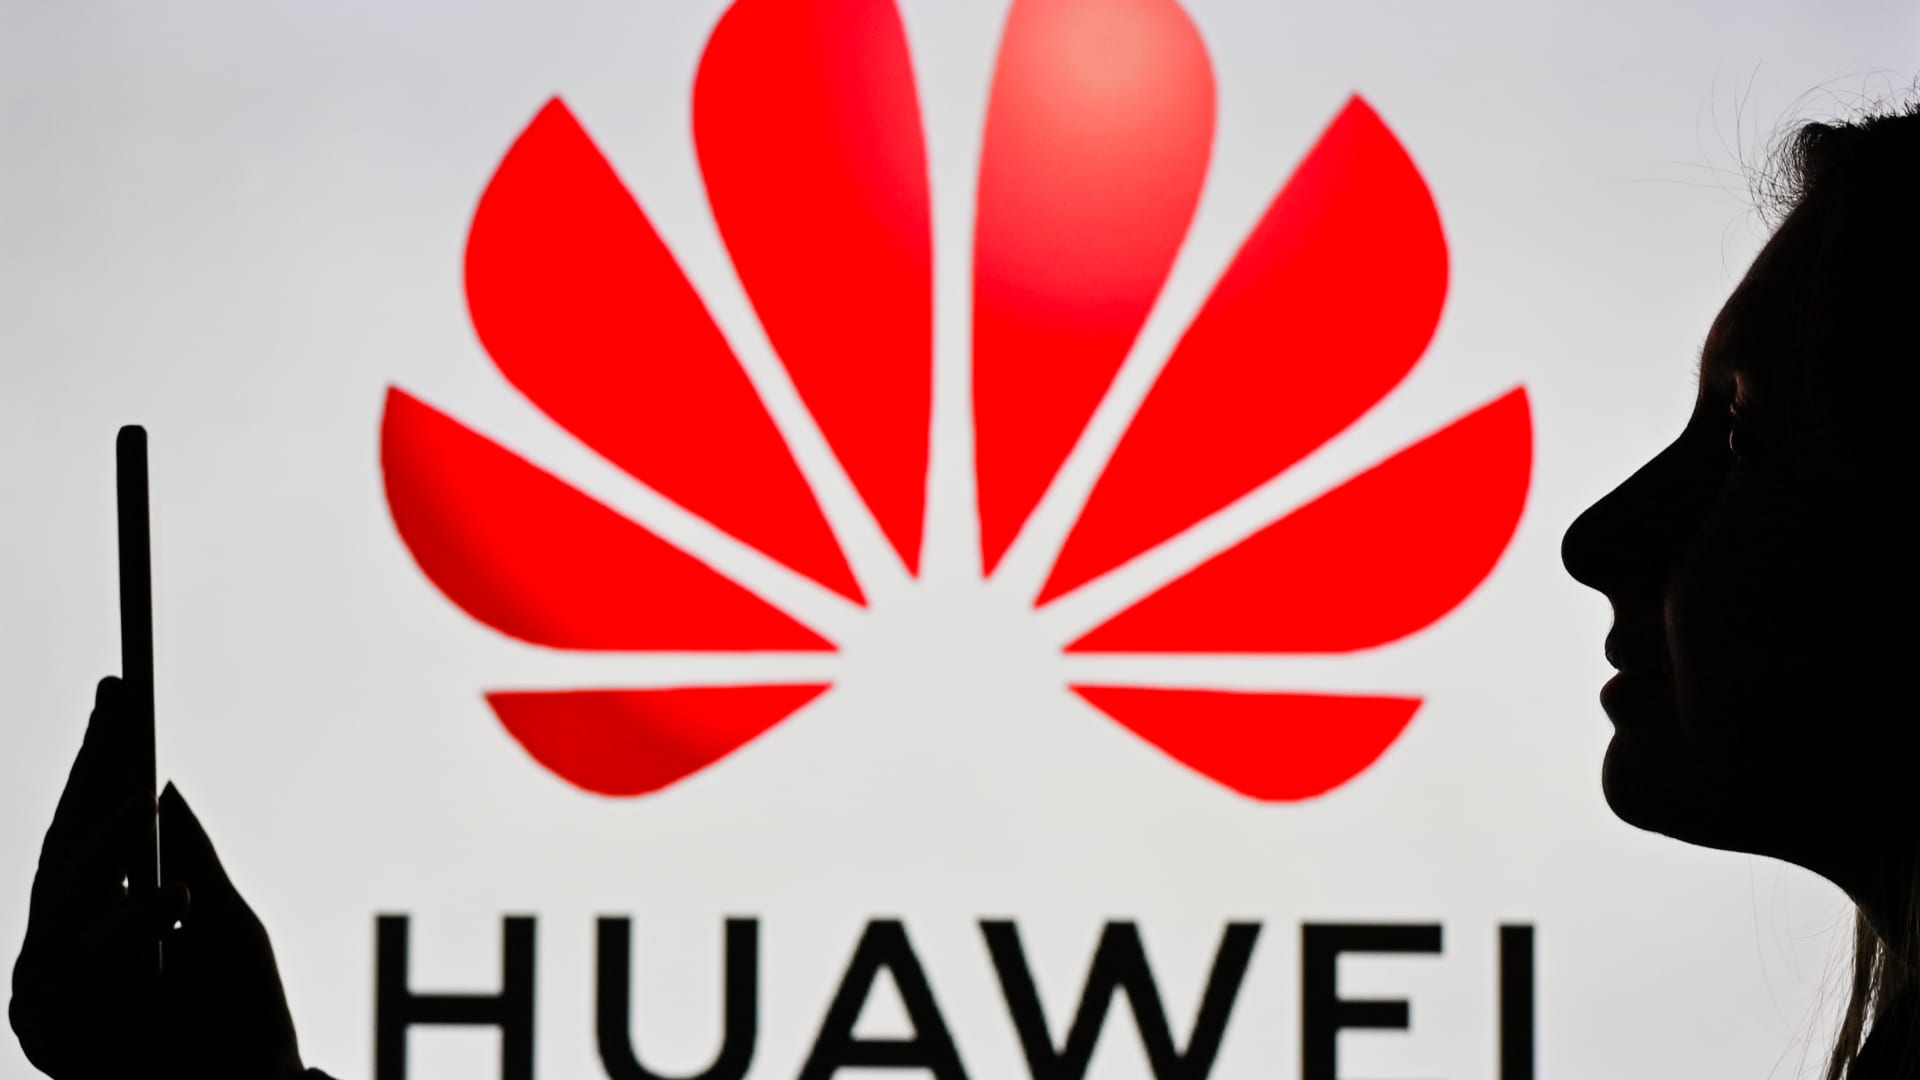 Huawei reportedly says it has produced domestic chip style and design applications inspite of U.S. sanctions